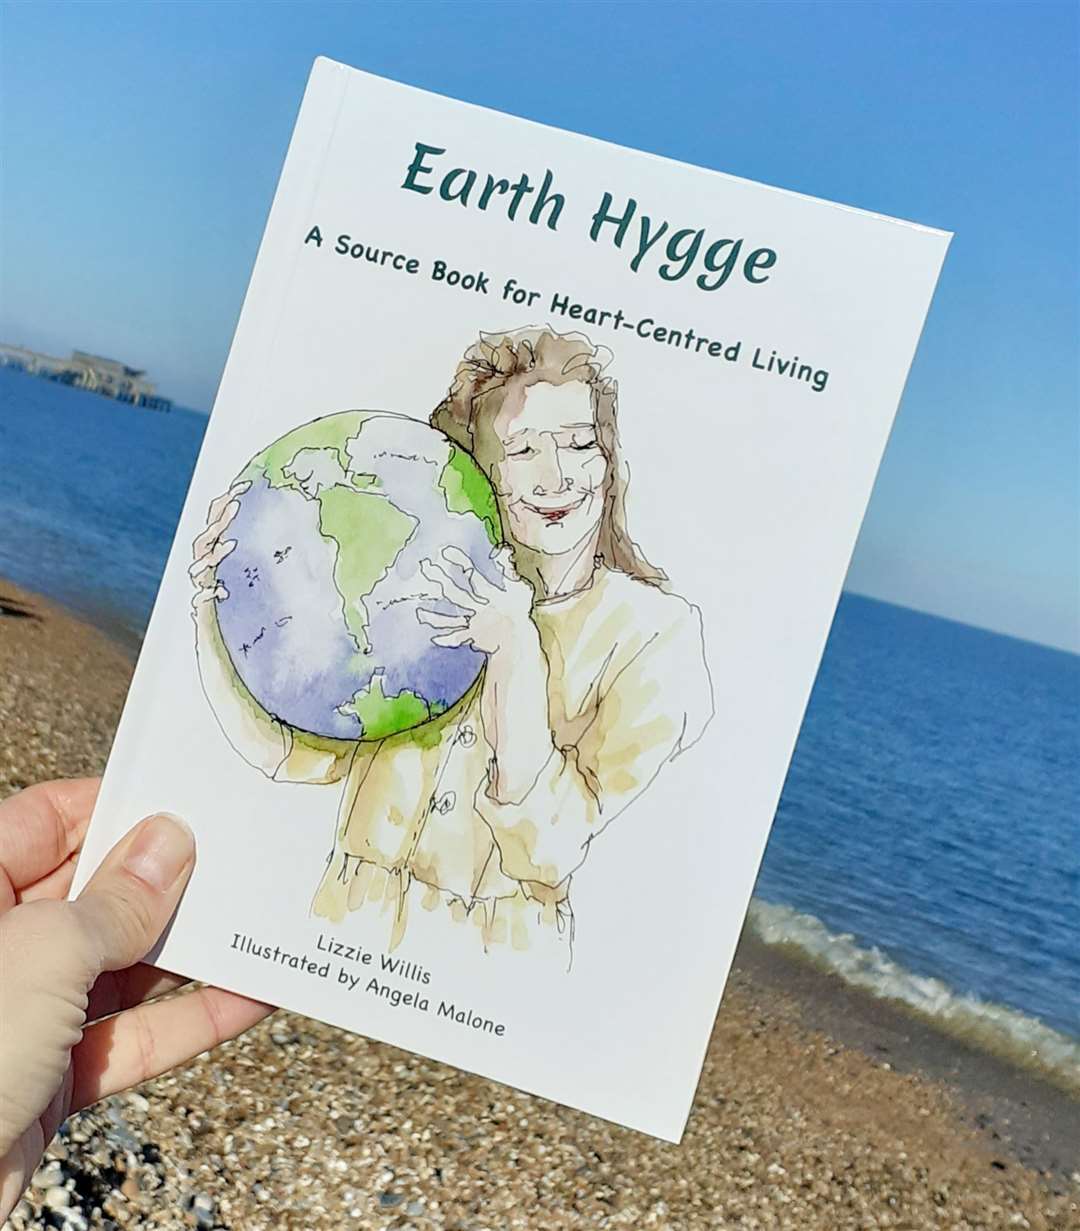 Earth Hygge by Lizzie Willis includes illustrations by Angela Malone